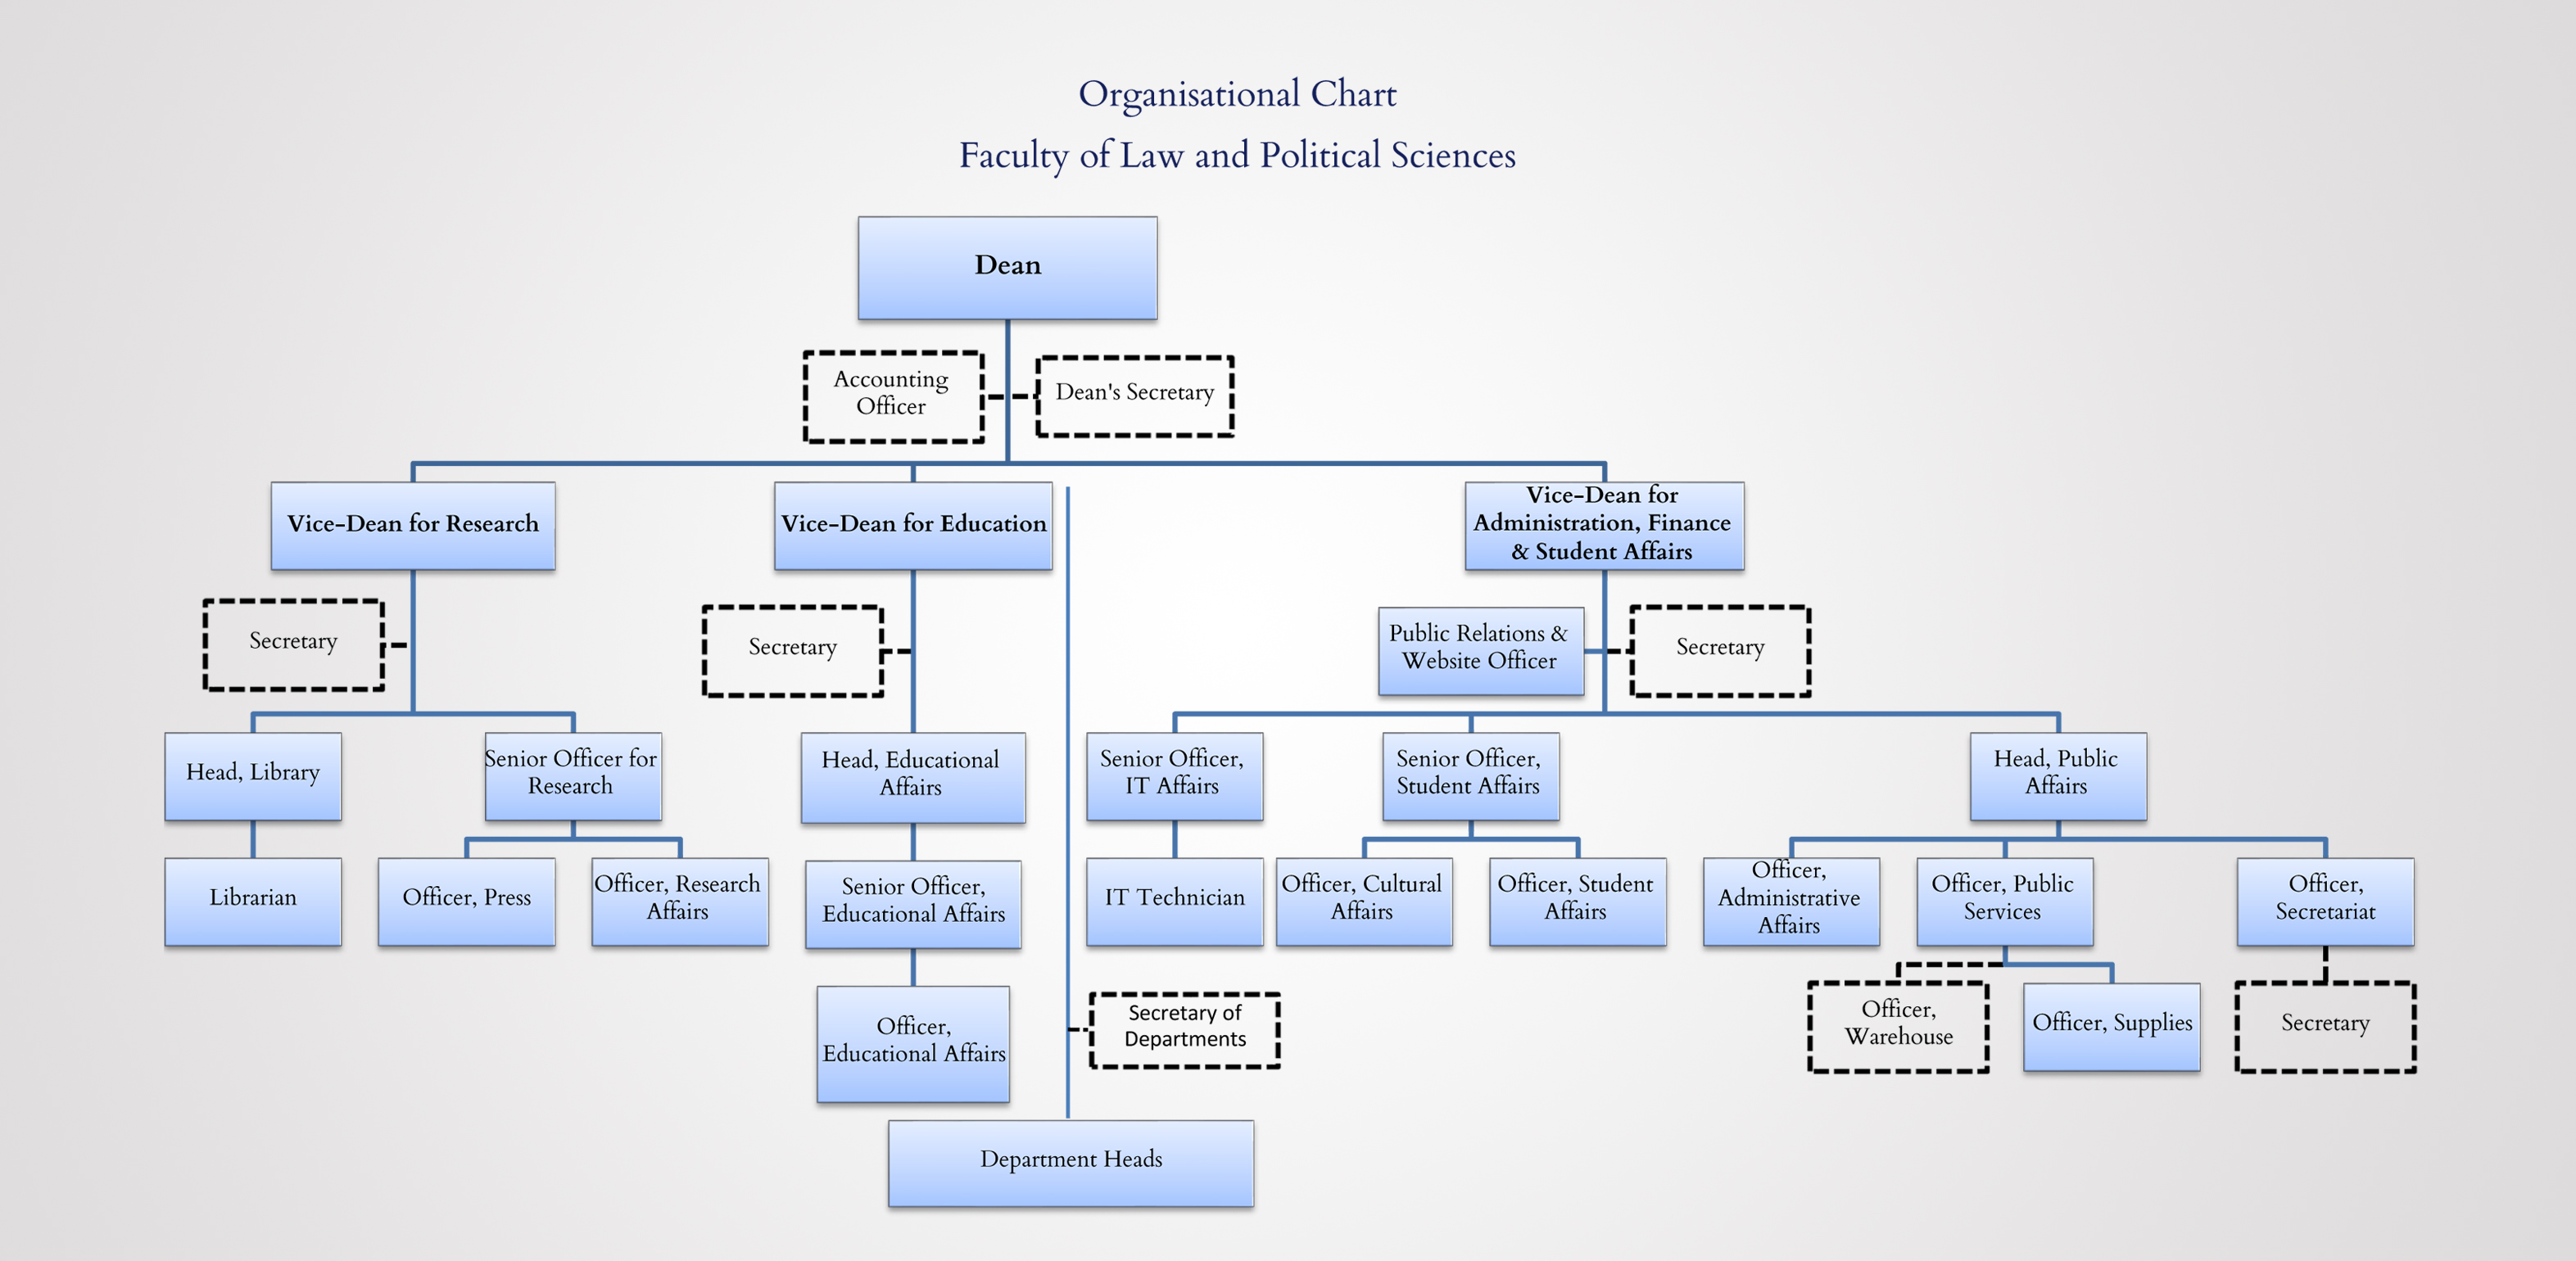 LPS Faculty's Organisational Chart